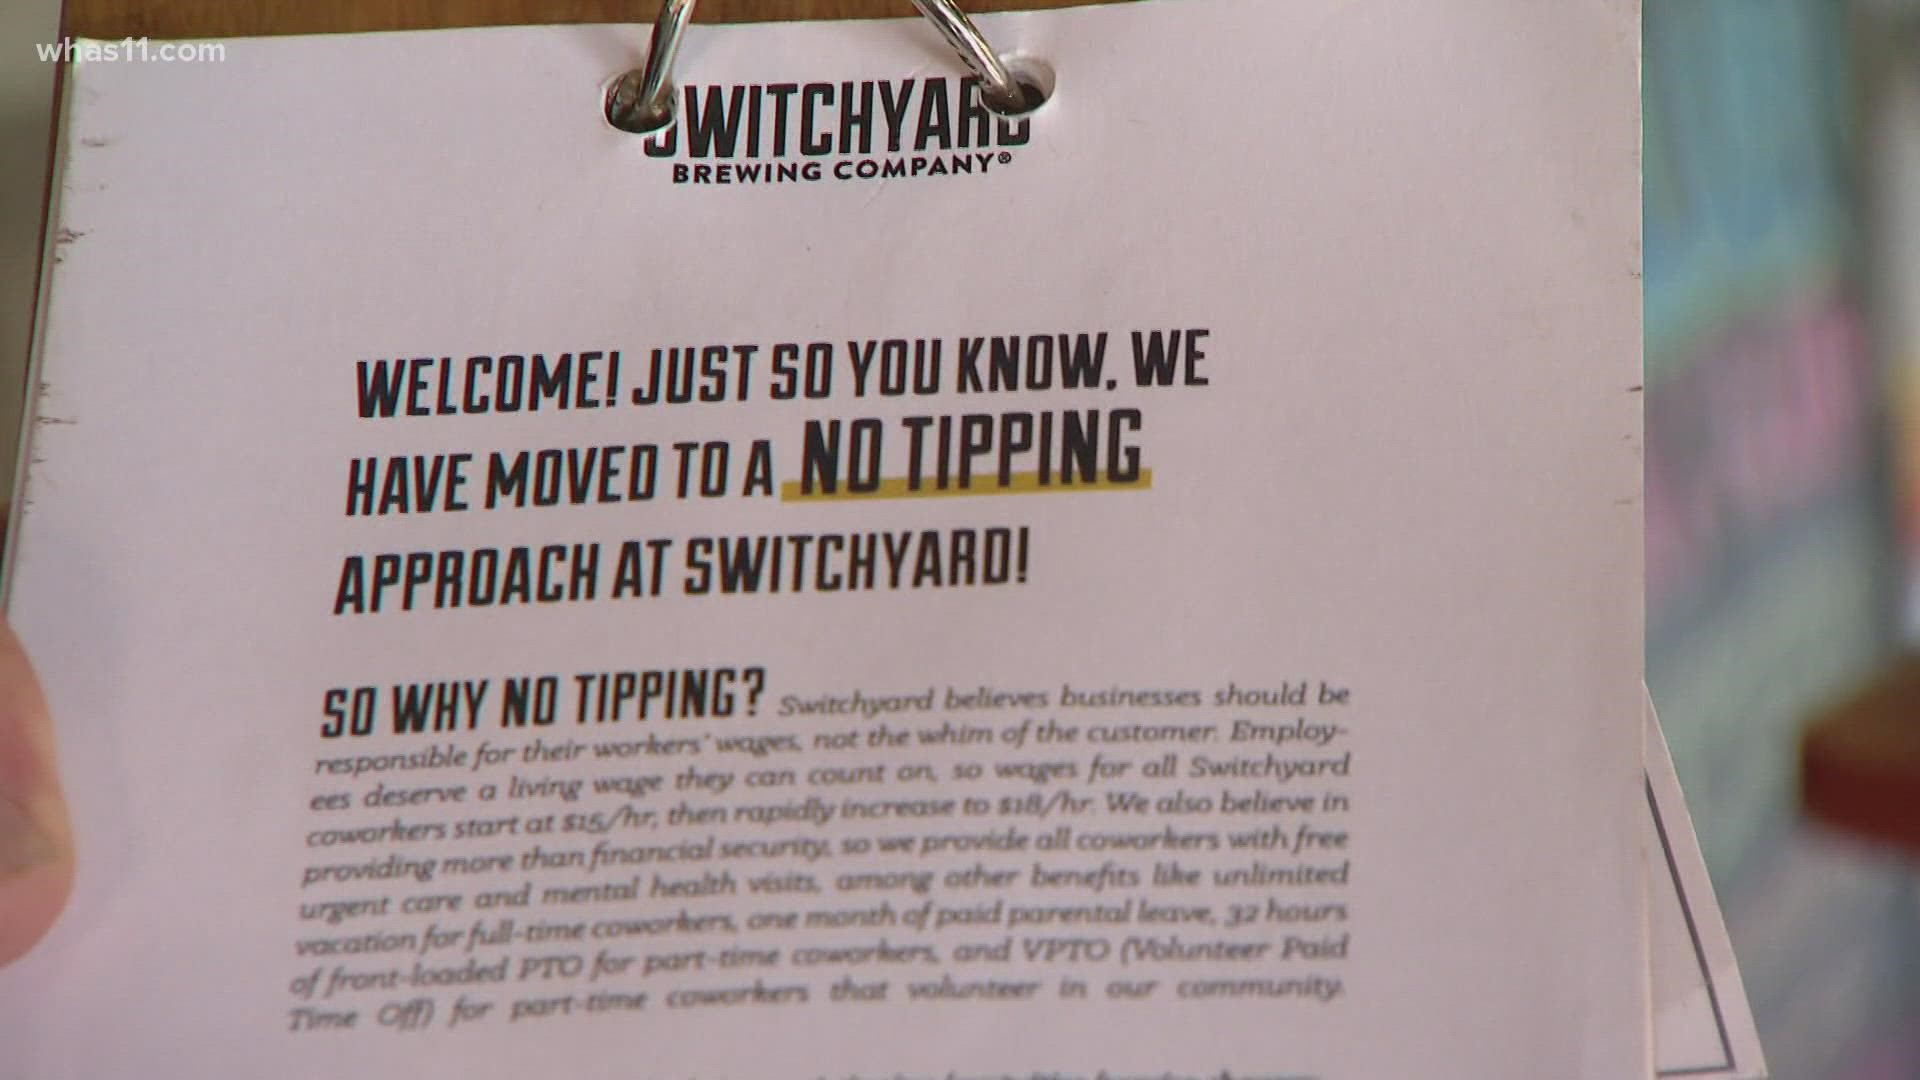 The president of Switchyard Brewing Company said while studying payroll data, he discovered a glaring tipping disparity.